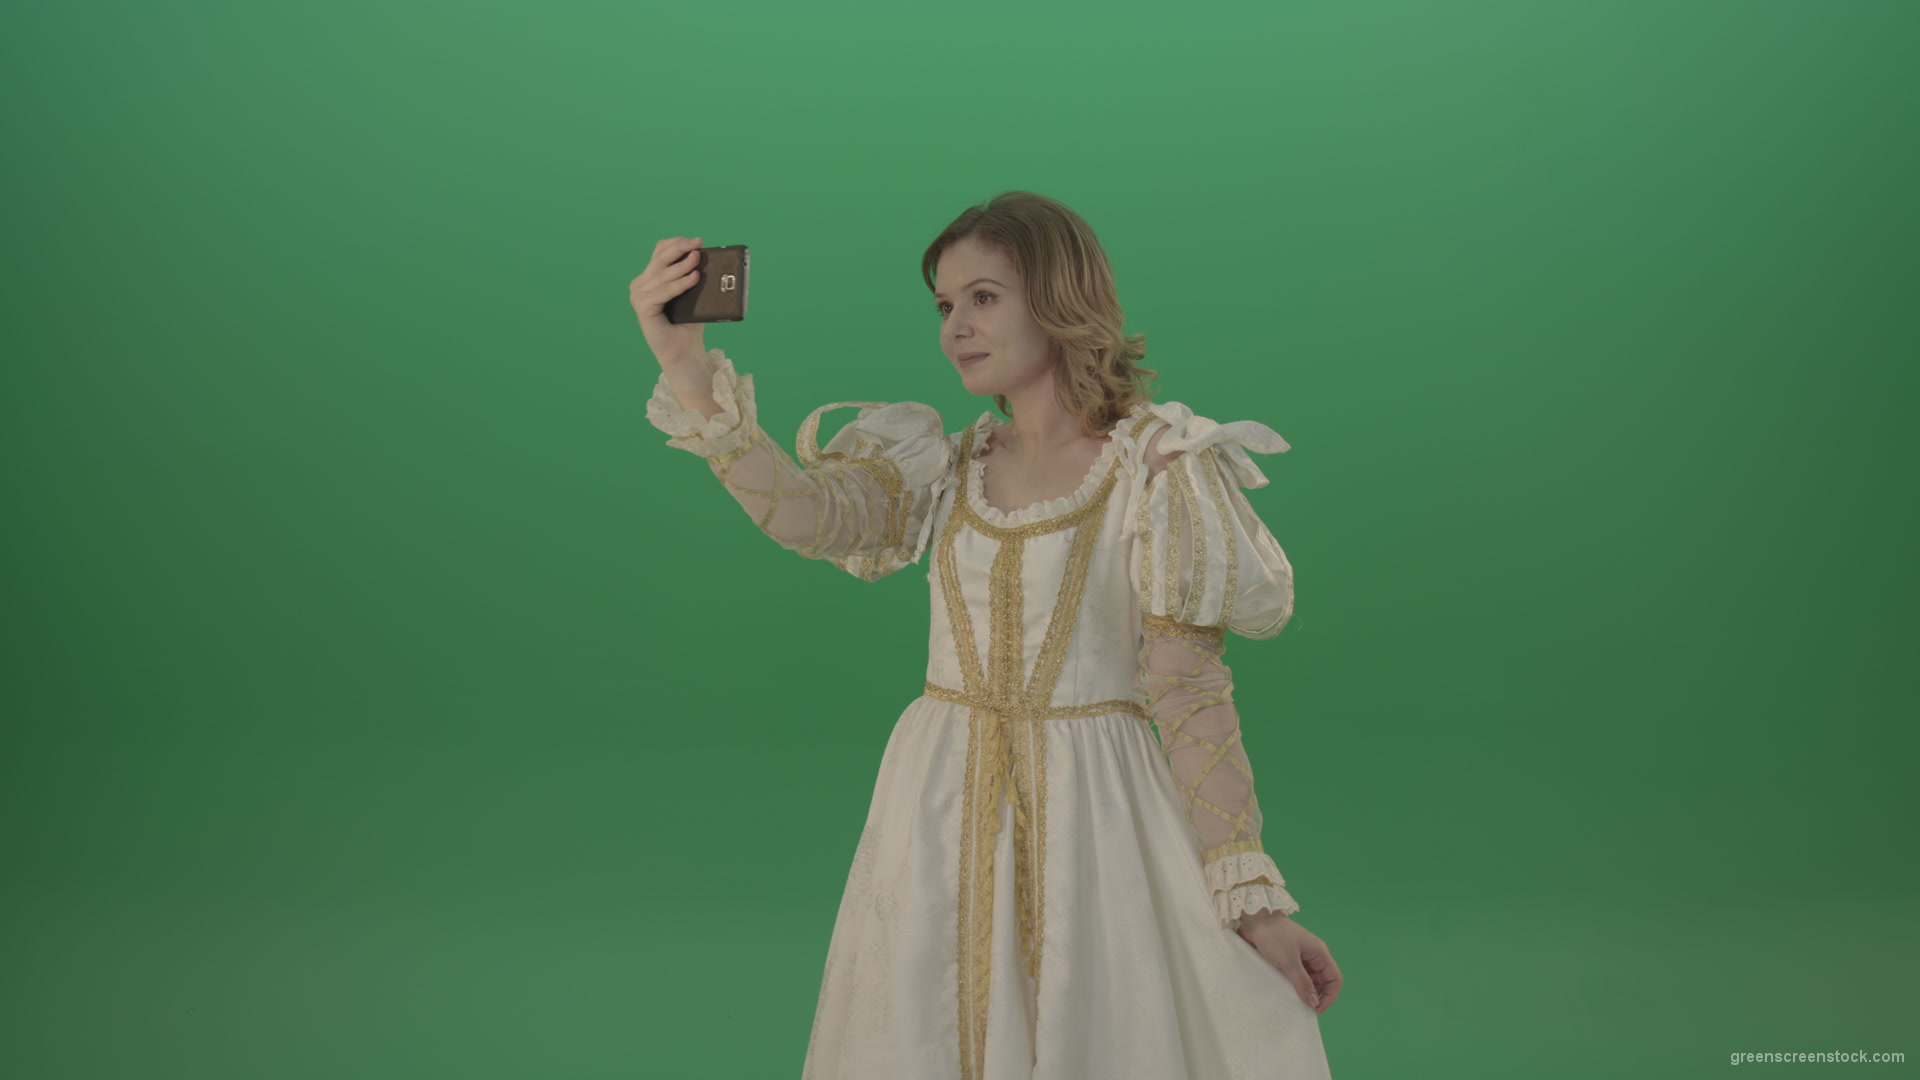 Princess-girl-dressed-in-a-light-suit-makes-a-sephi-on-a-modern-phone-isolated-on-chromakey-background_006 Green Screen Stock